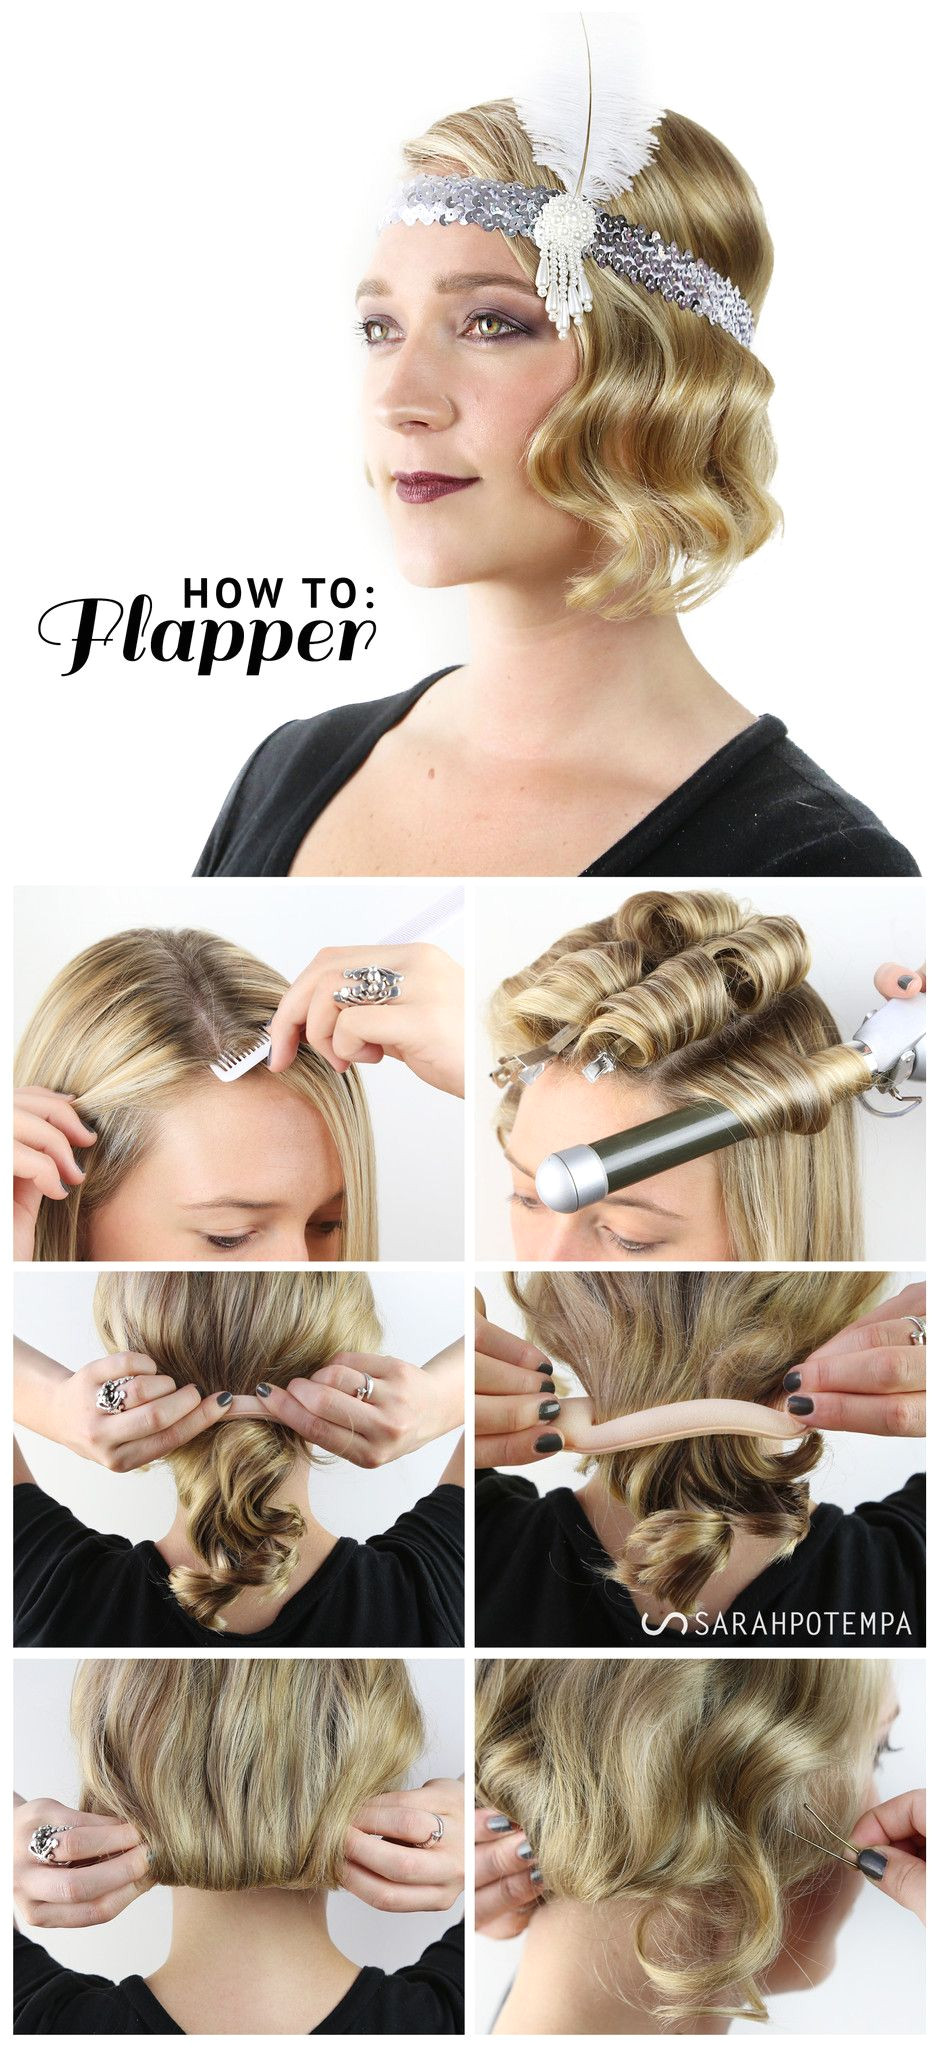 Flappers Hairstyles In the 1920s Halloween Fabulous Flapper Hair Makeup & Natural Beauty